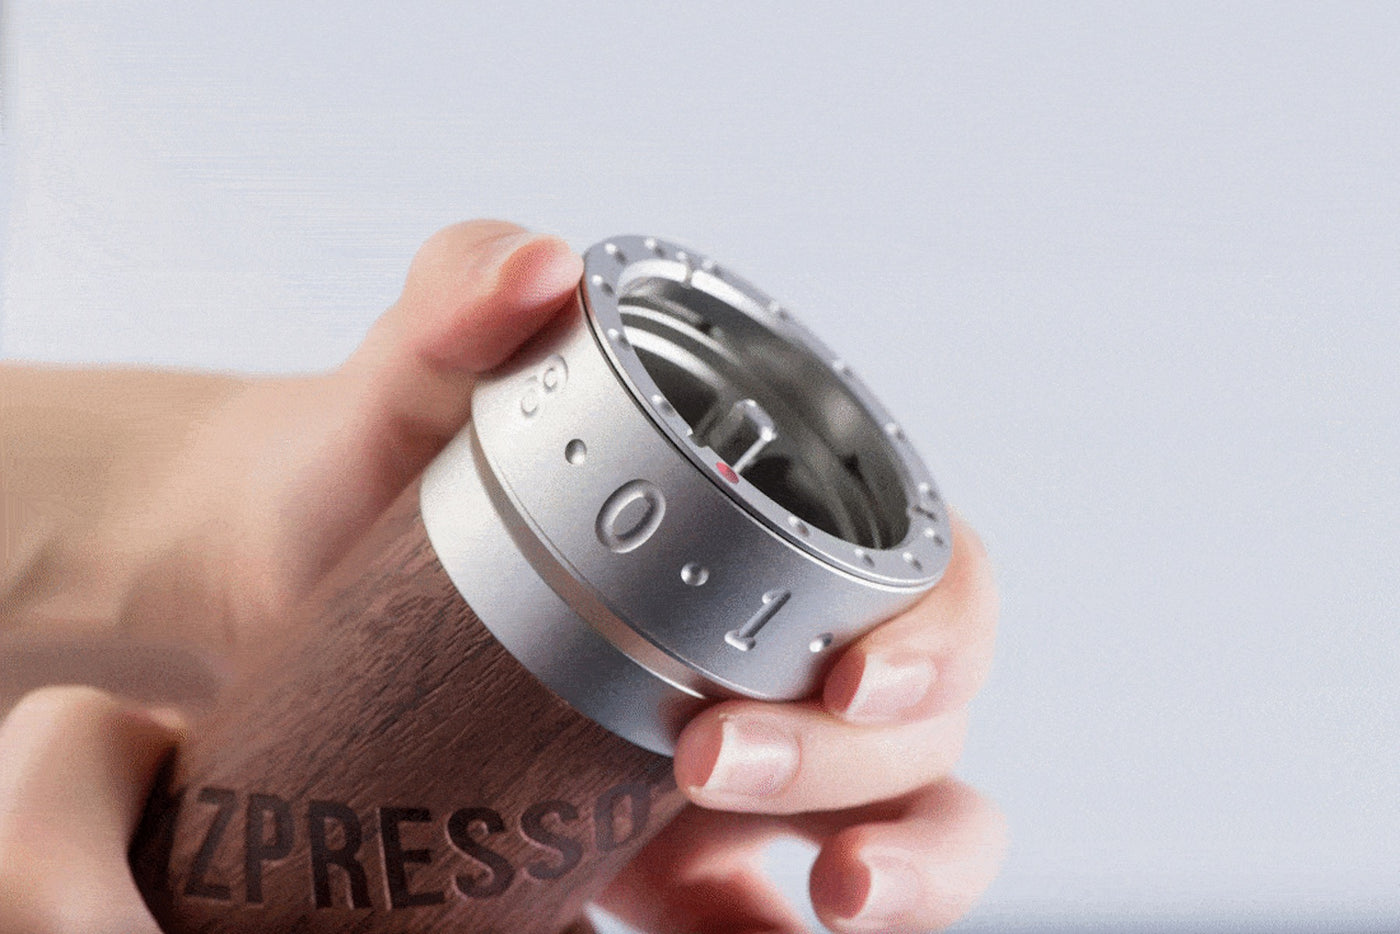 1Zpresso K-Plus Manual Coffee Grinder External Adjustment Ring | THE COFFEE GOODS